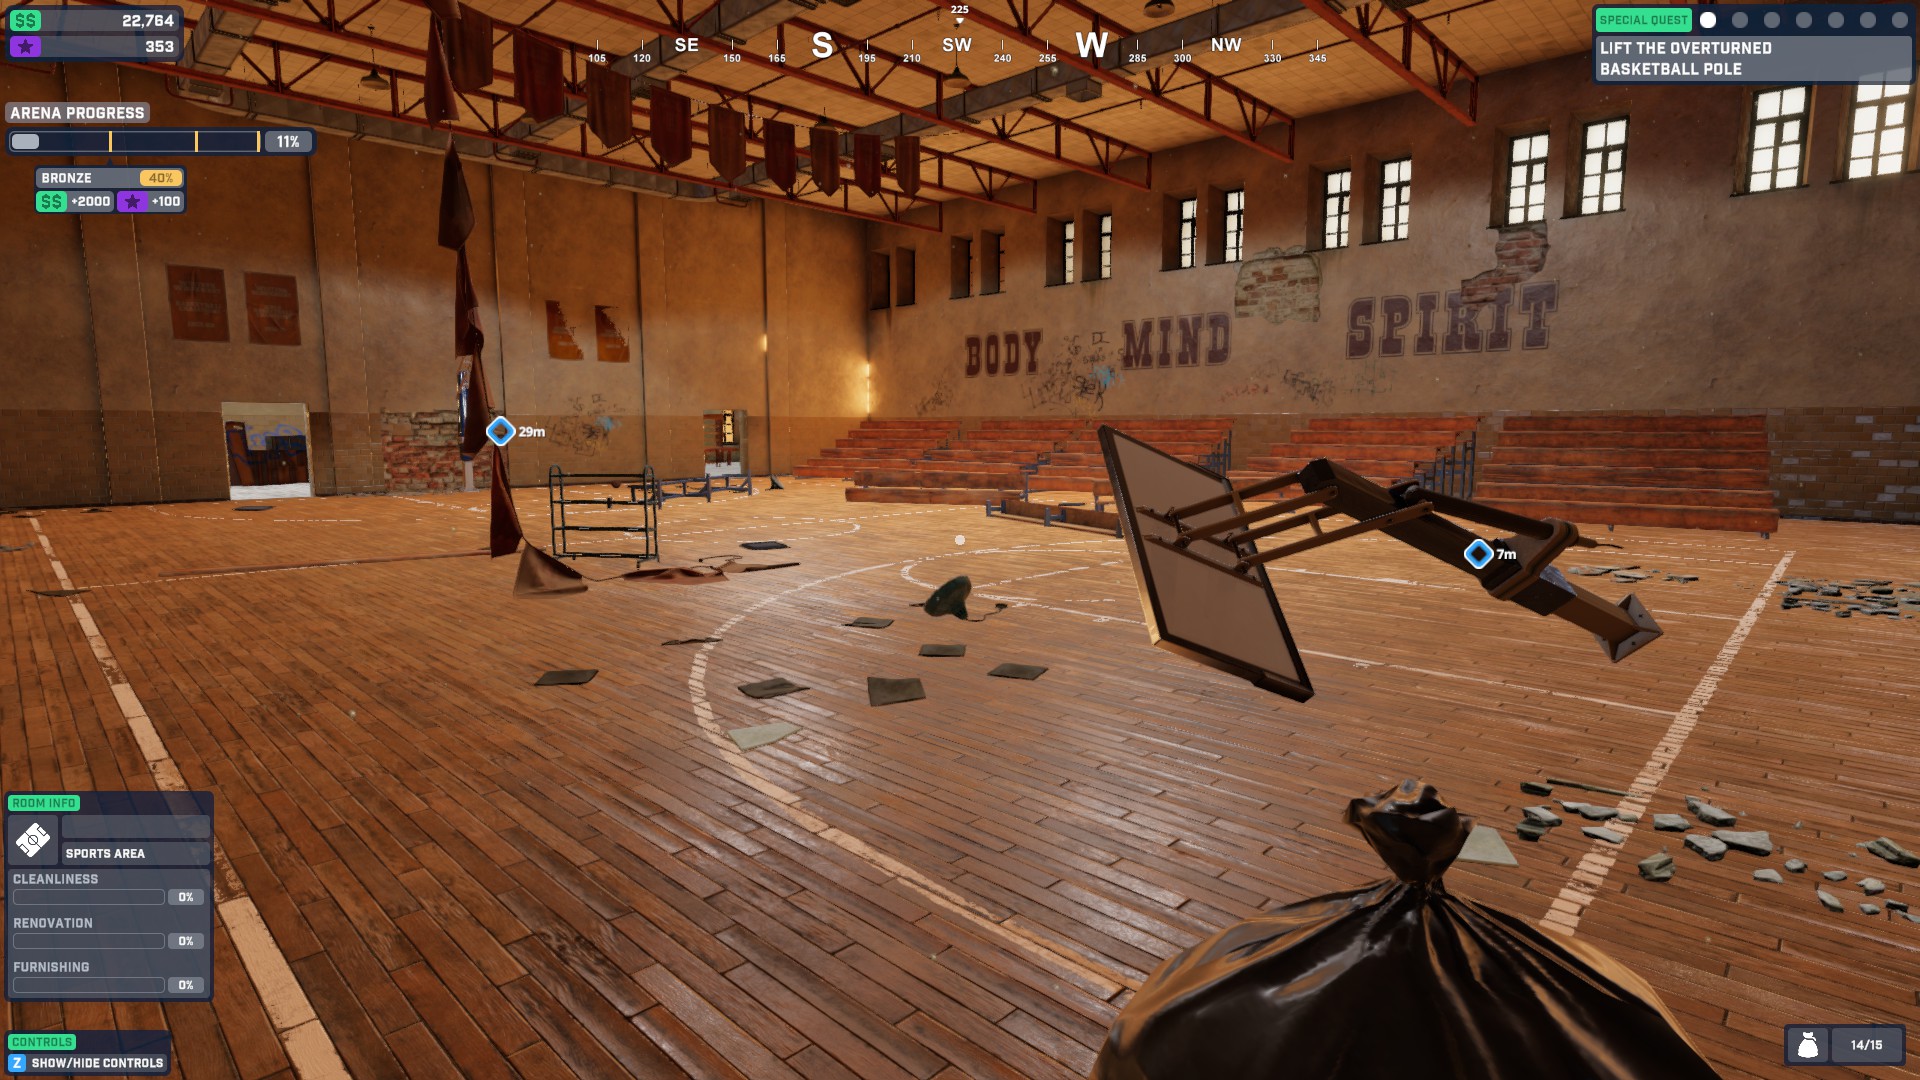 A basketball court filled with rubbish, broken equipment and fallen flags. the player is holding a trash bag in their hands.